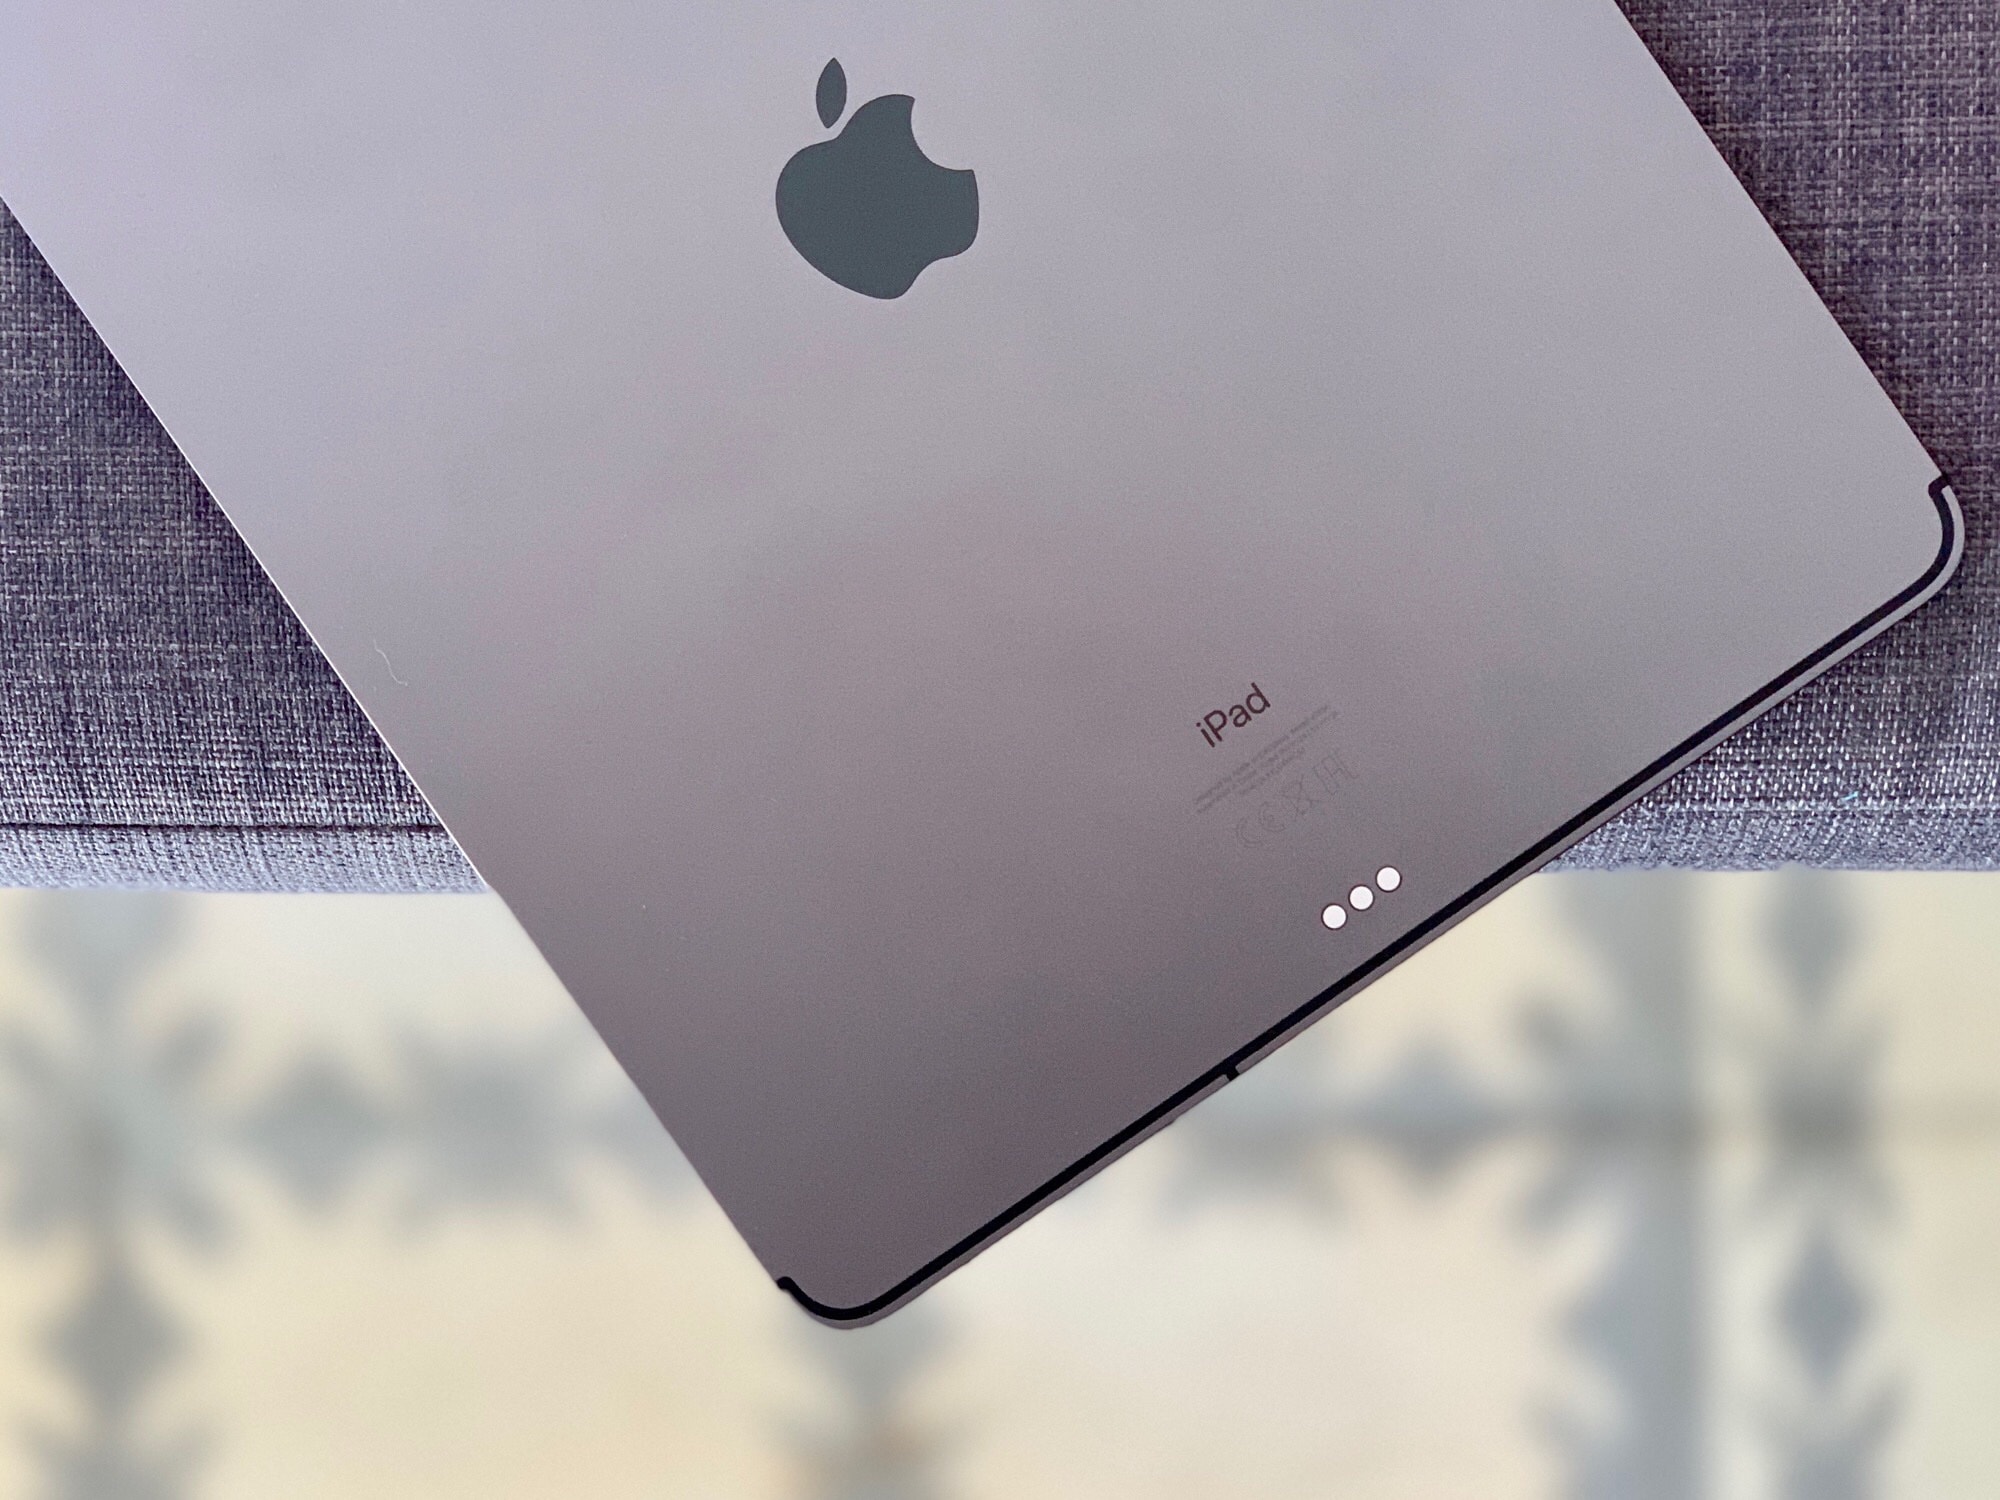 The new 2018 iPad Pro is a lust object you probably don’t need.